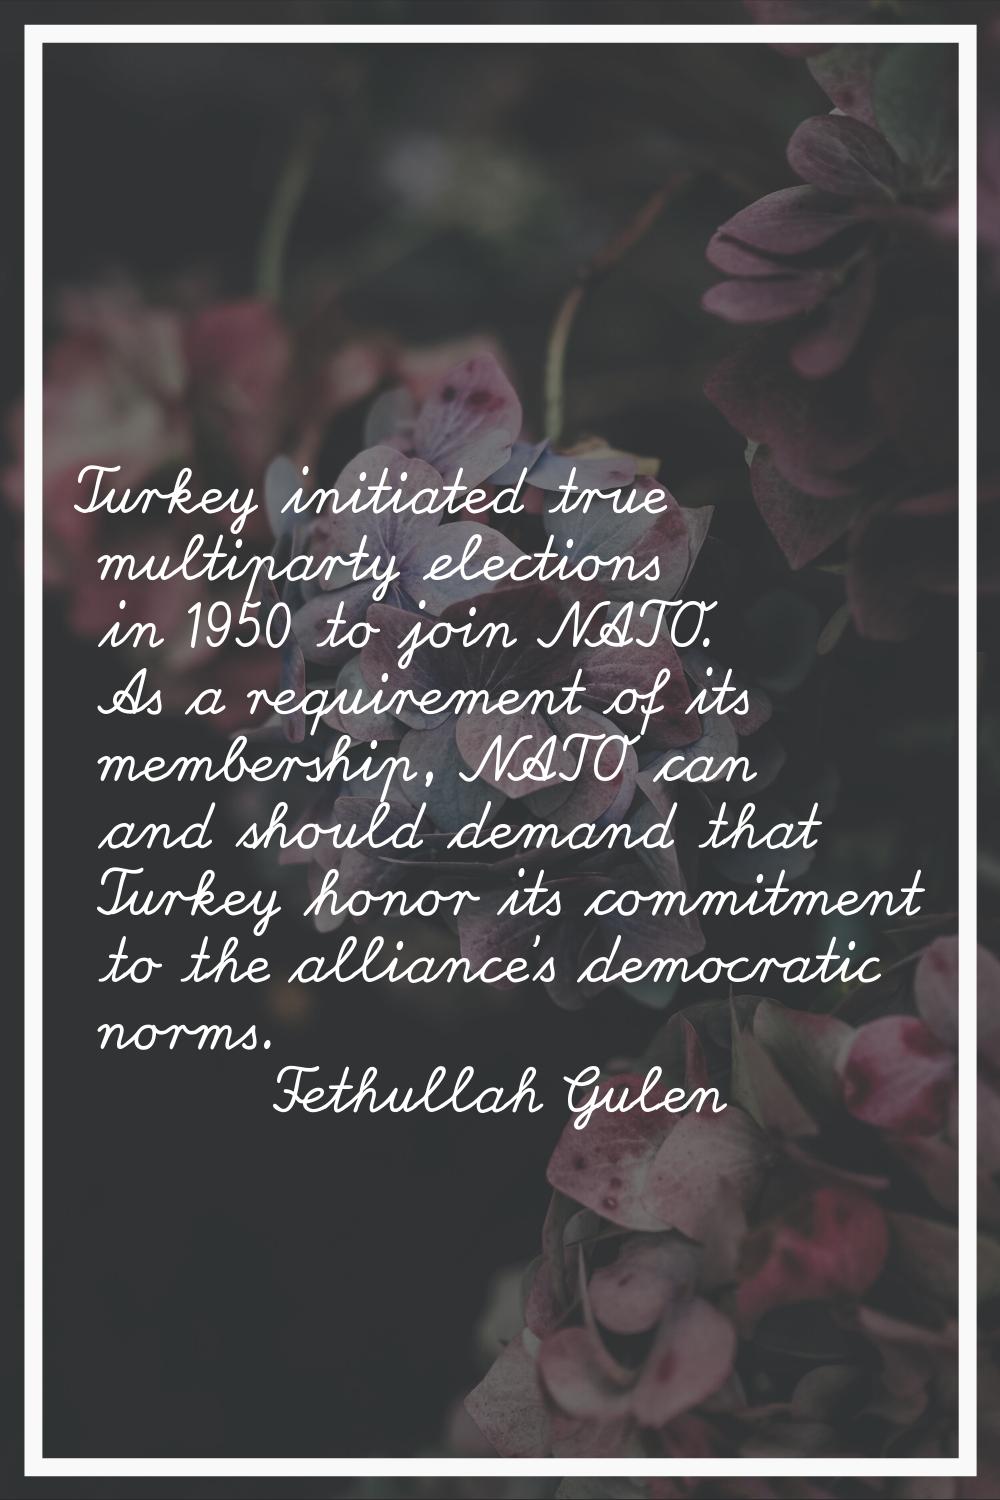 Turkey initiated true multiparty elections in 1950 to join NATO. As a requirement of its membership